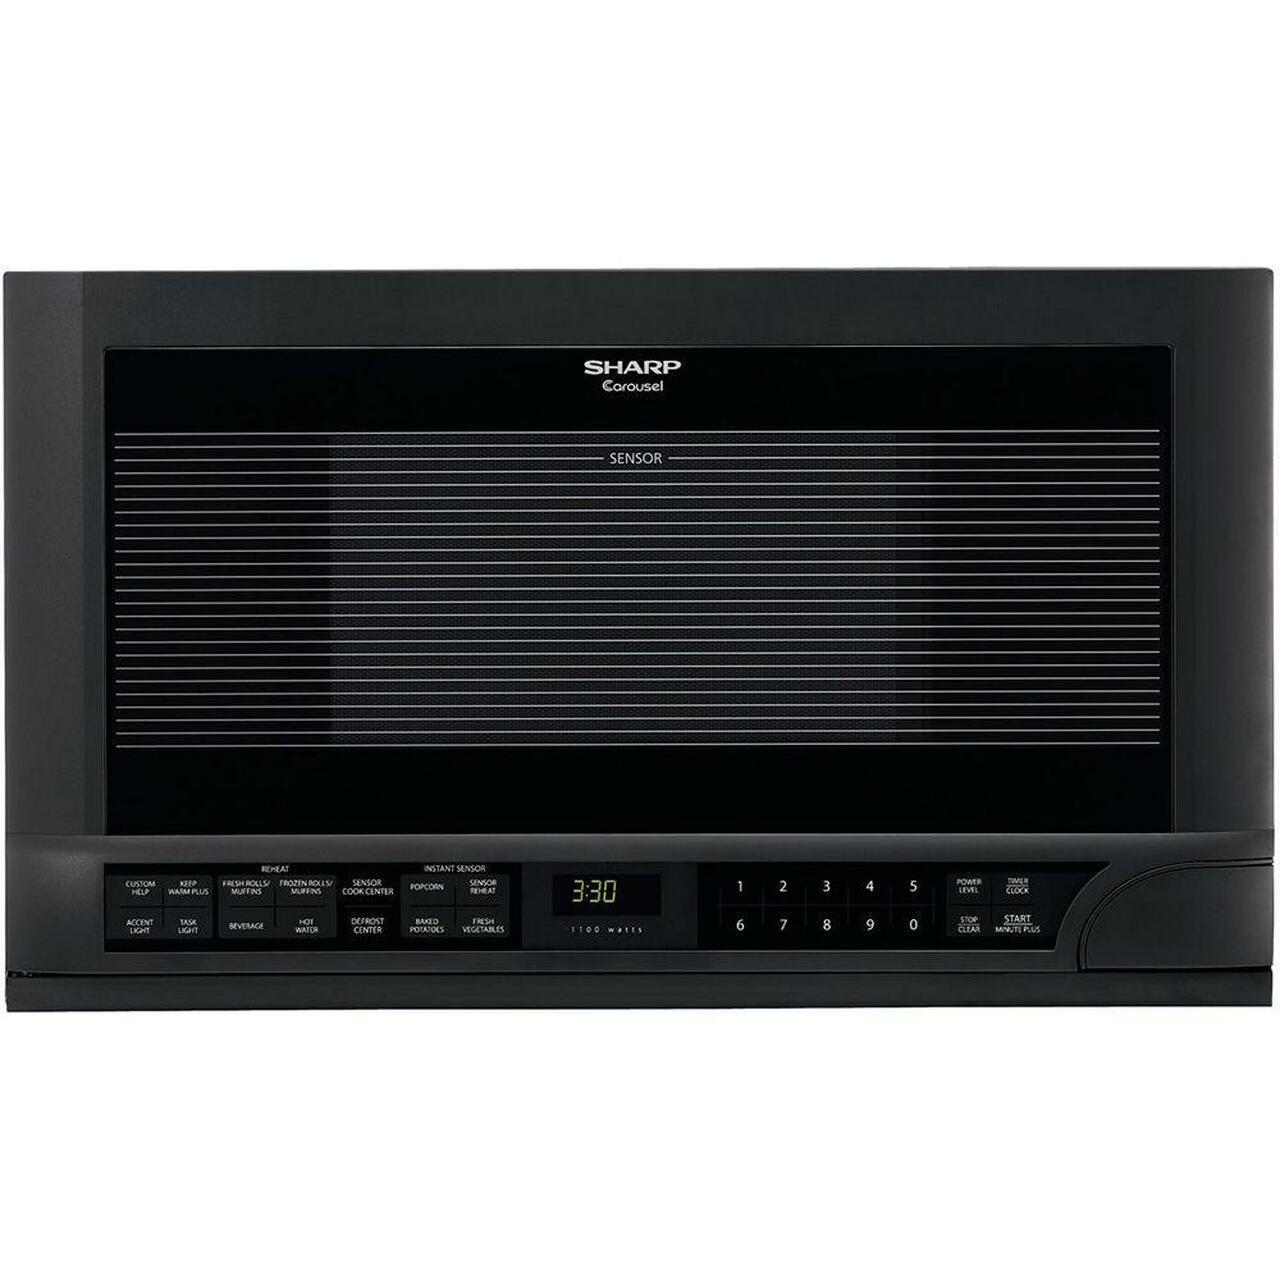 Sharp 1.5 cu. ft. 1100W Black Sharp Over-the-Counter Carousel Microwave Oven